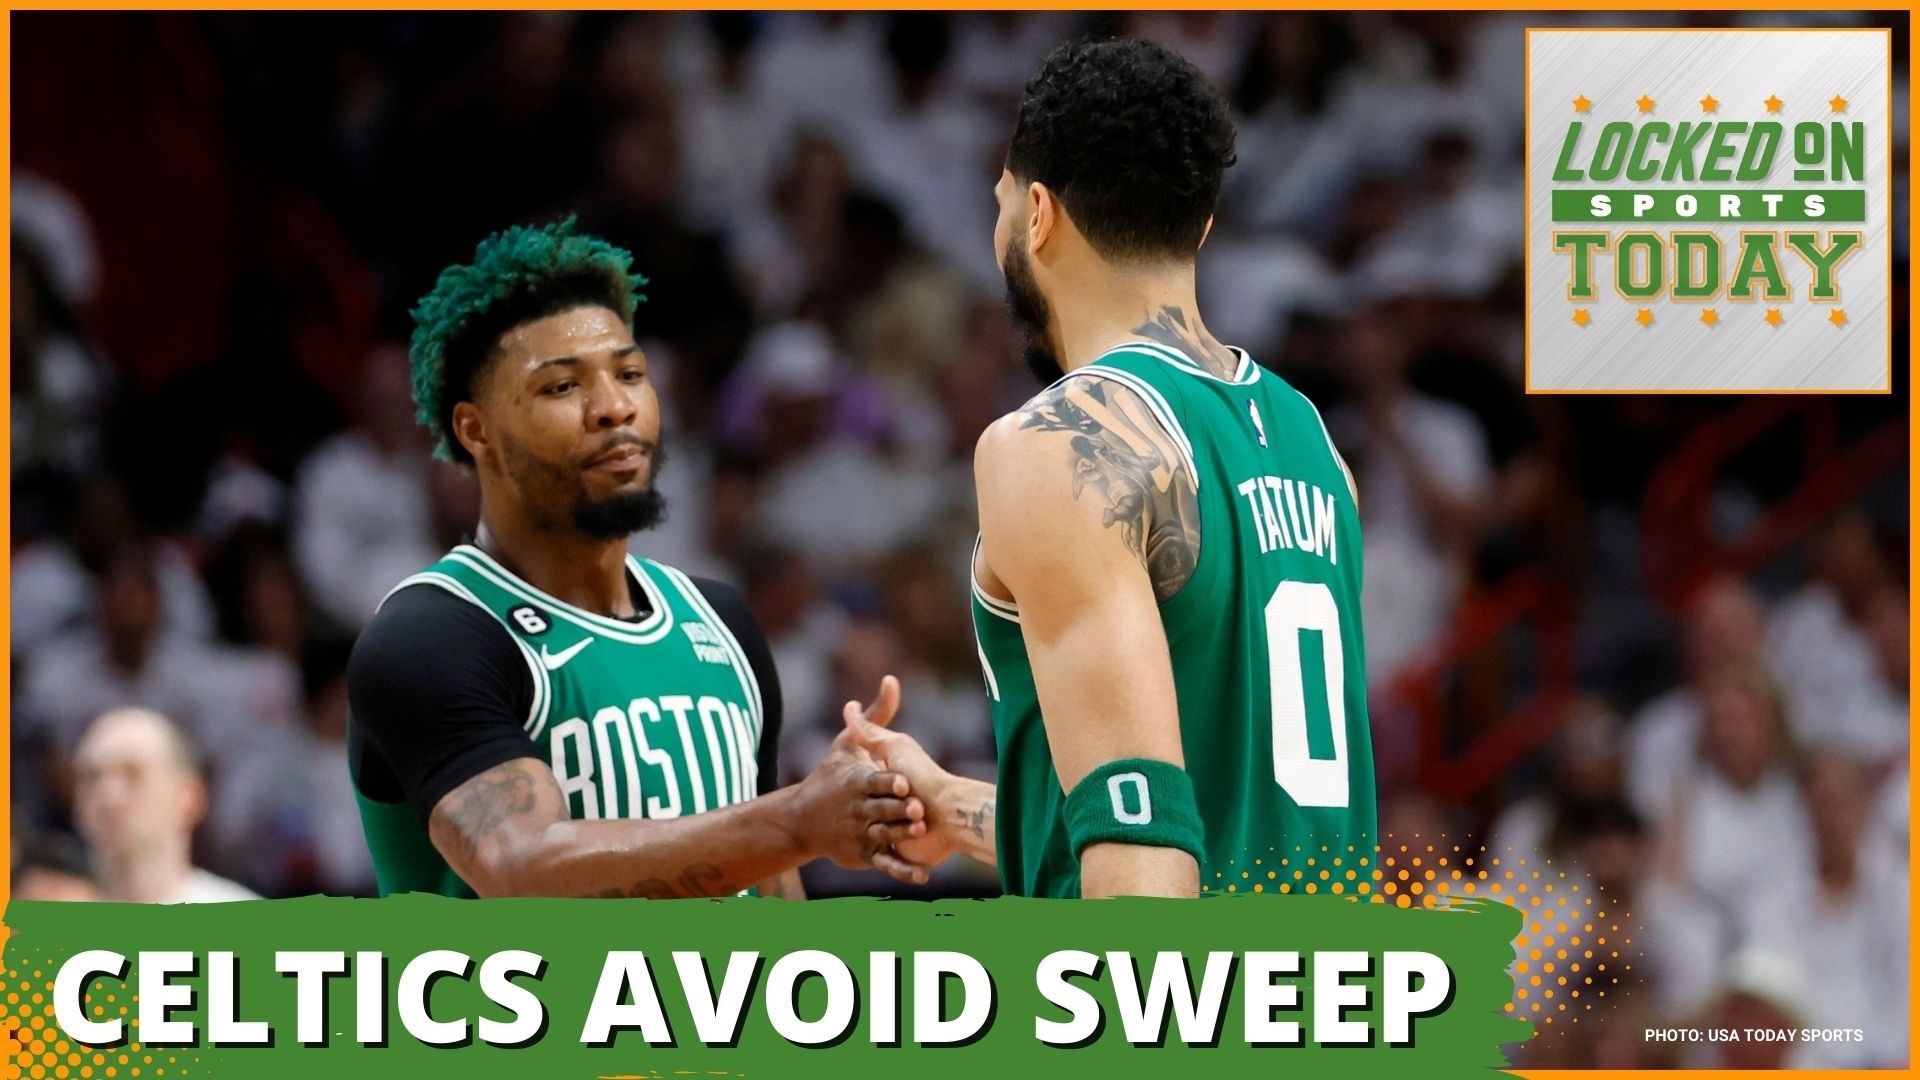 Discussing the day's top sports stories from the Boston Celtics avoiding a sweep to the possibility Lebron James could retire soon.